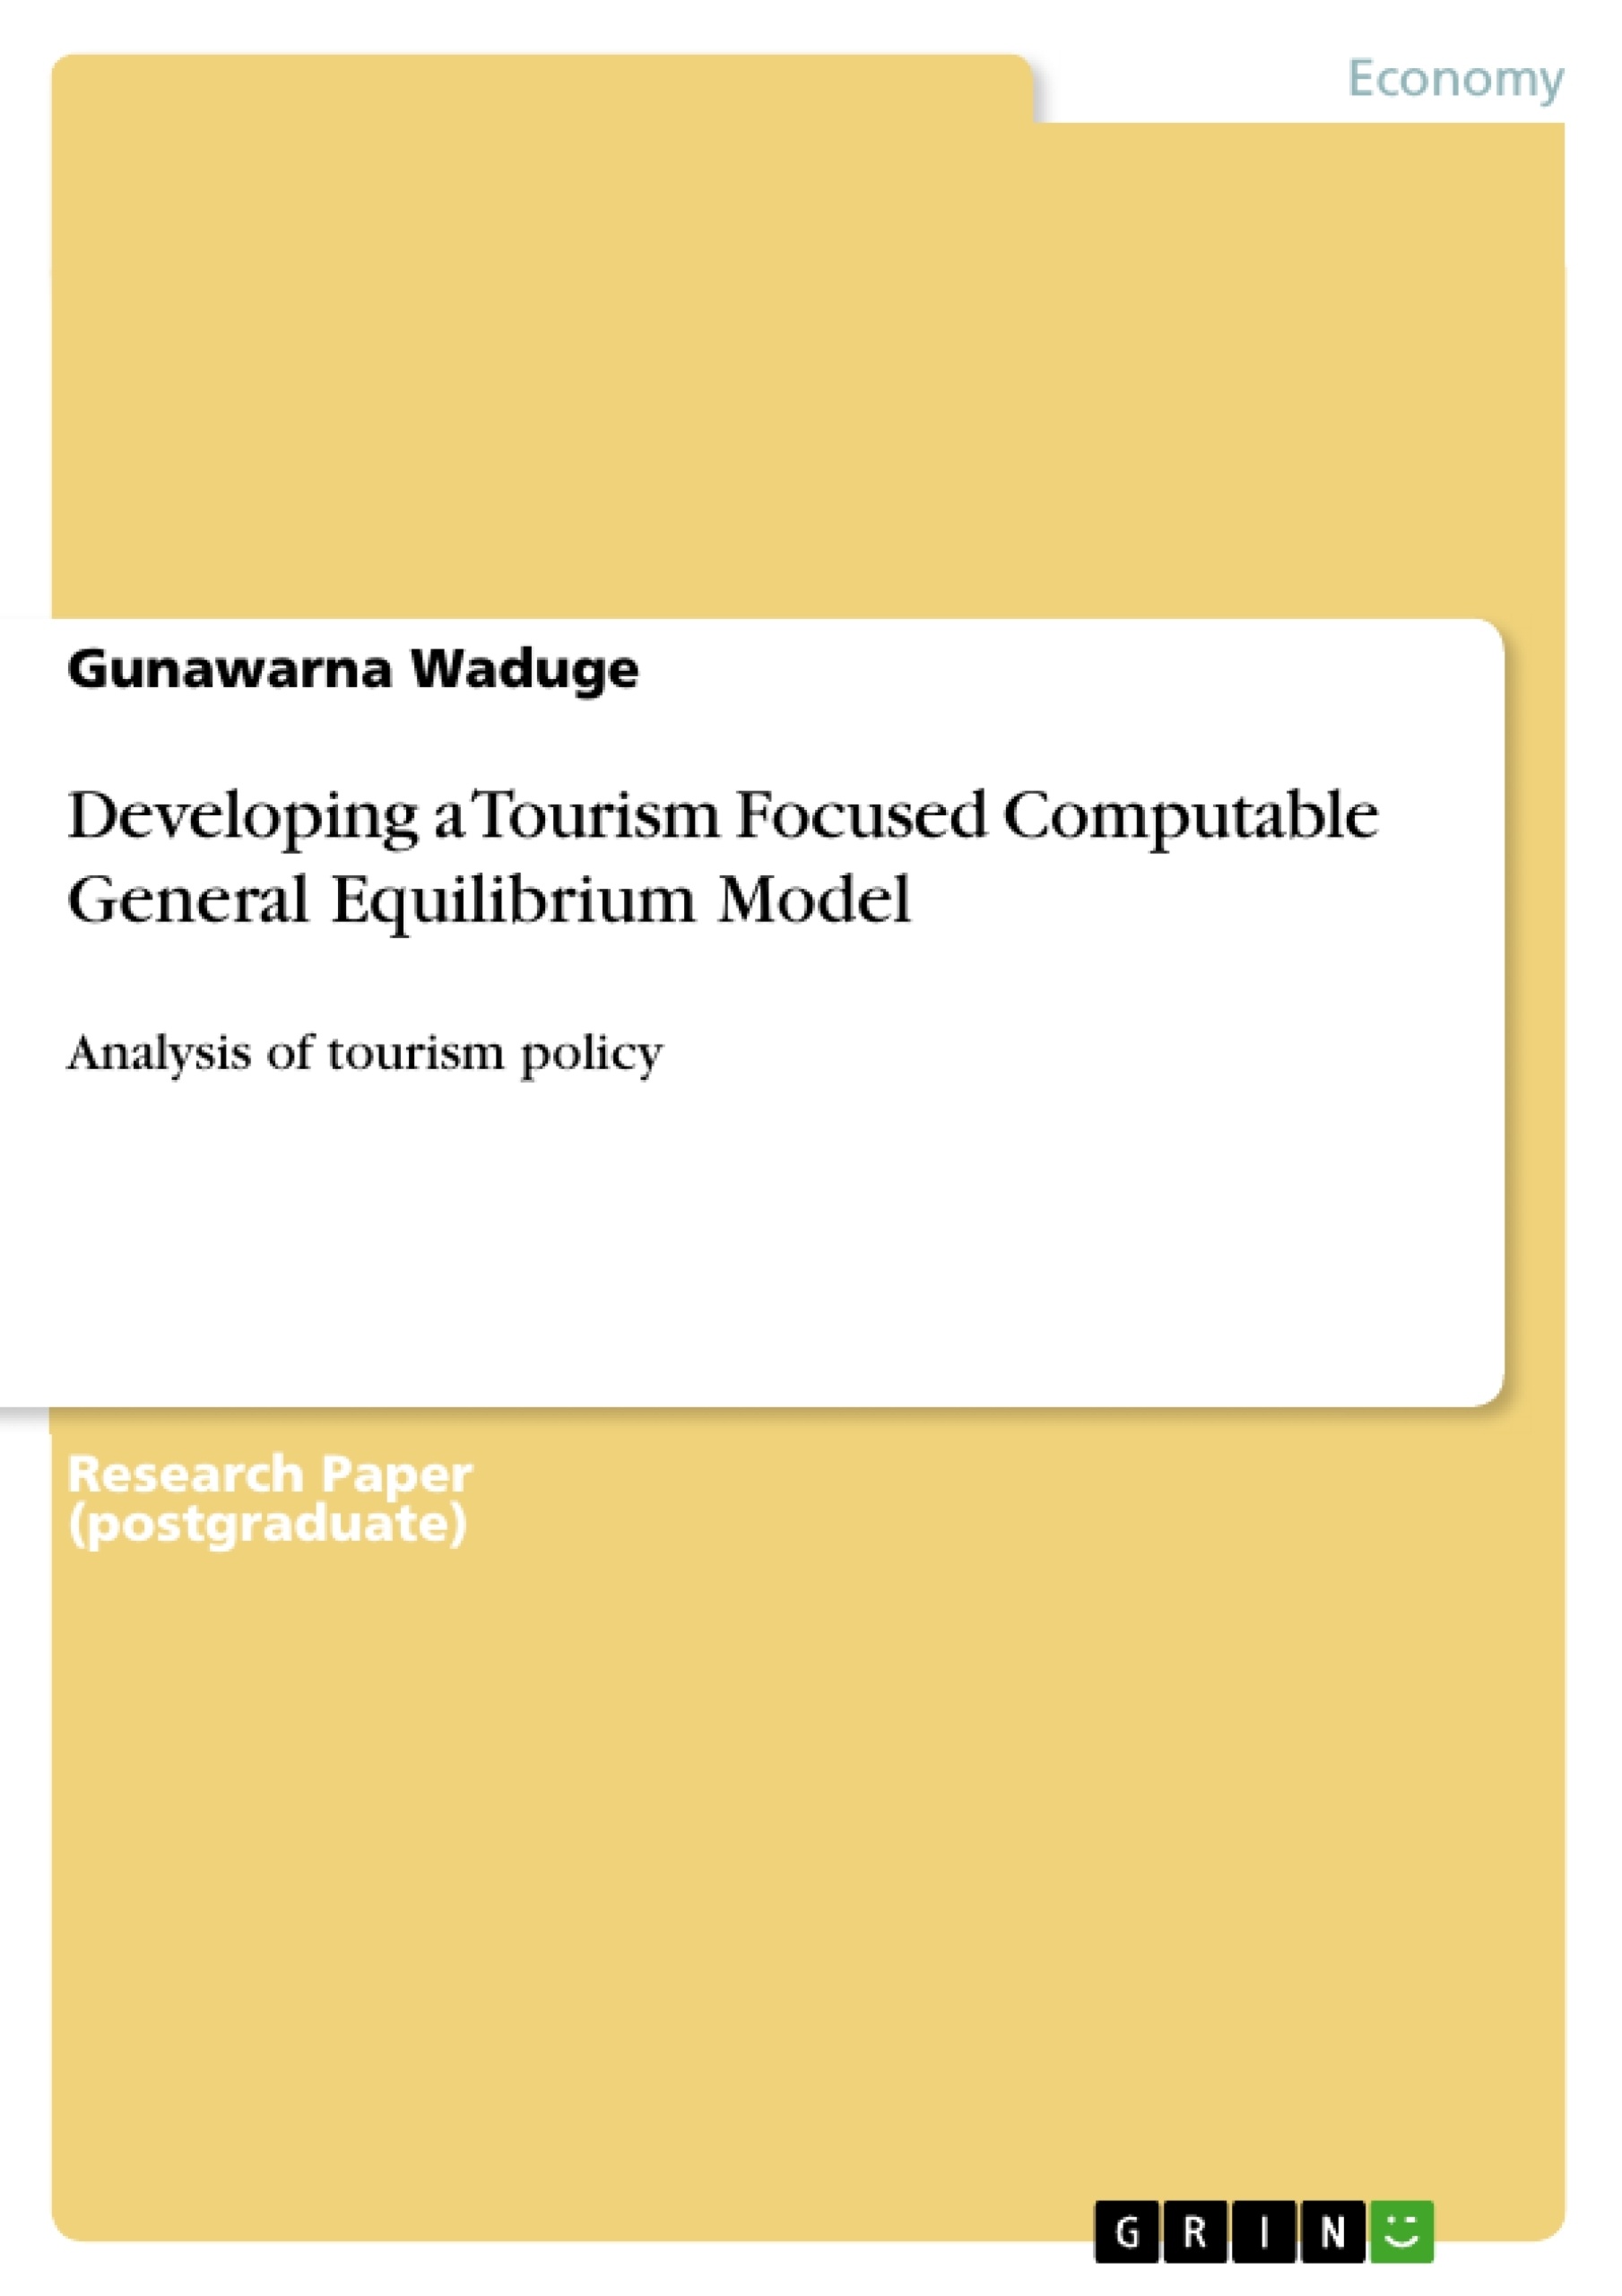 Title: Developing a Tourism Focused Computable General Equilibrium Model